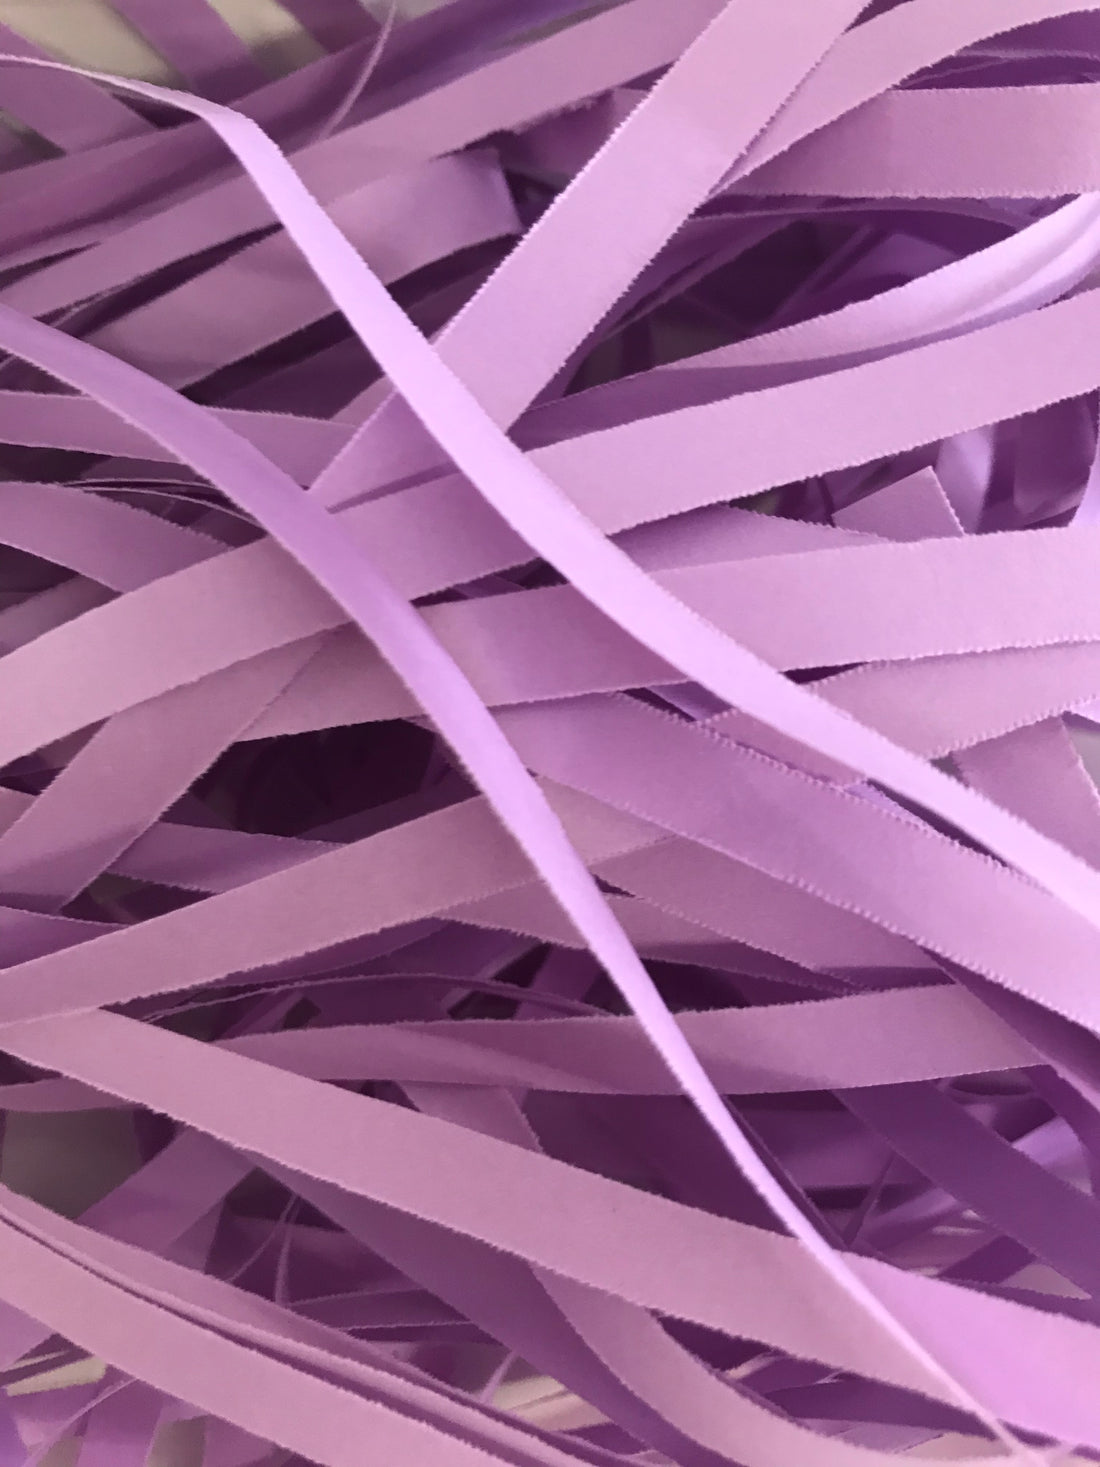 Purple Thick Shredded Paper